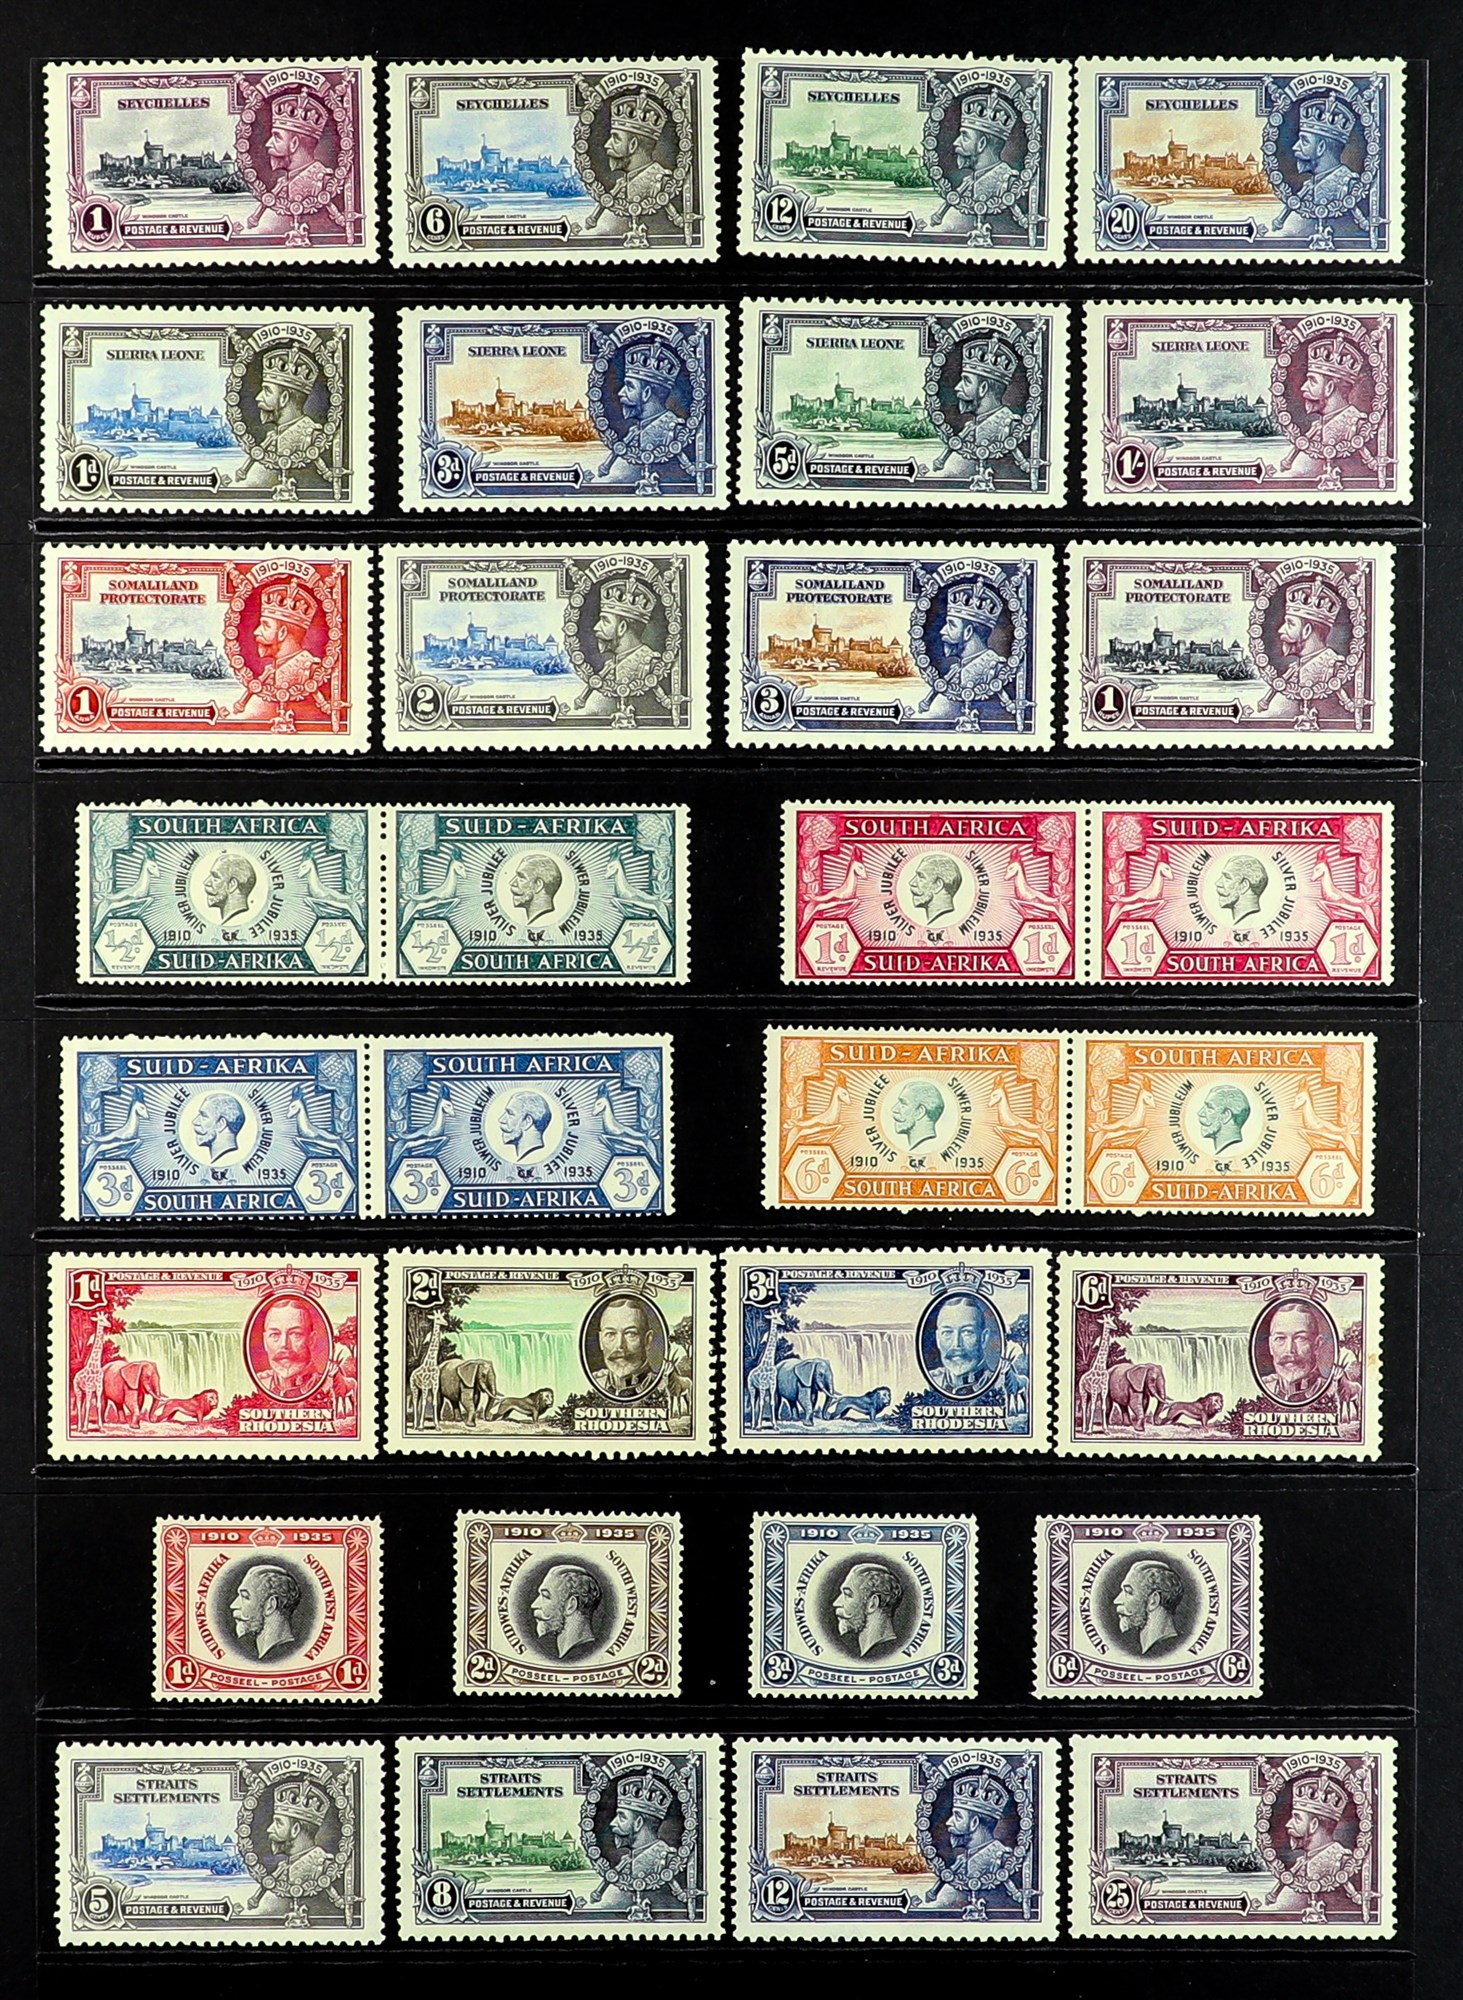 COLLECTIONS & ACCUMULATIONS 1935 SILVER JUBILEE complete Commonwealth omnibus series (no Egypt), - Image 8 of 9